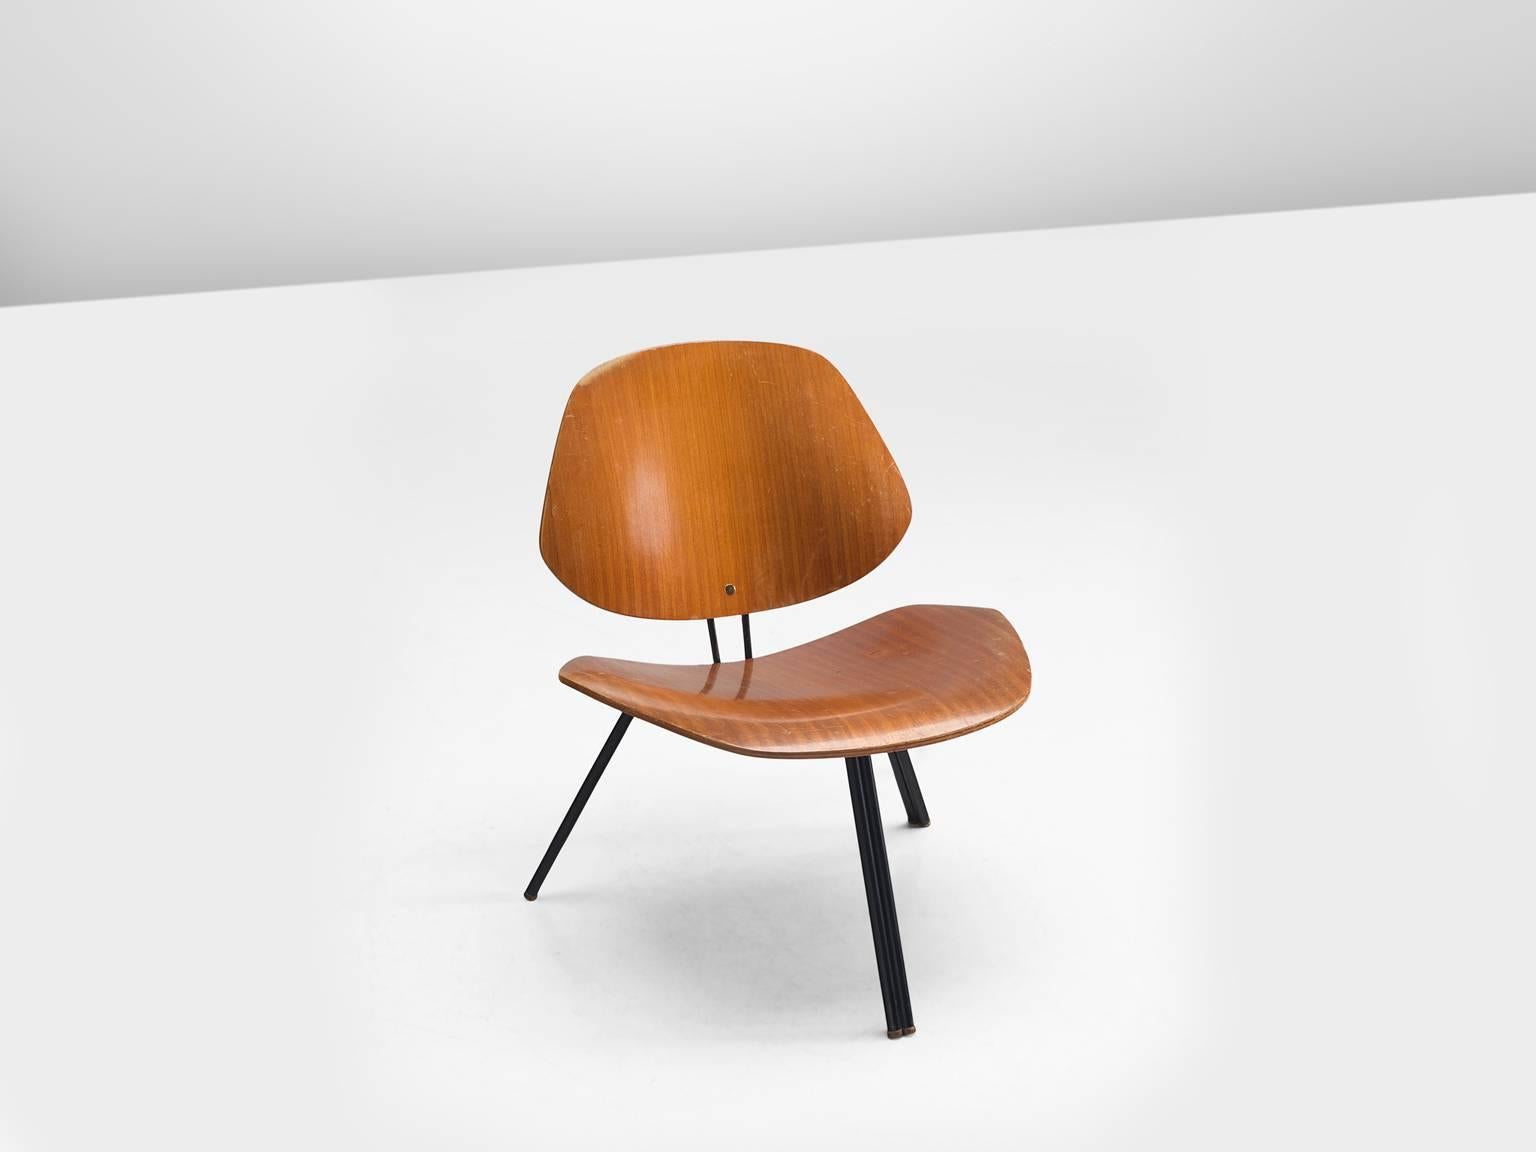 Chairs 'P31', wood and metal by Osvaldo Borsani for Tecno, Italy, 1957

This P31 chair is made by Osvaldo Borsani and produced by Tecno. The ant-legged tripod chair has thin metal black legs with seat and back that, apart from their sizing, are